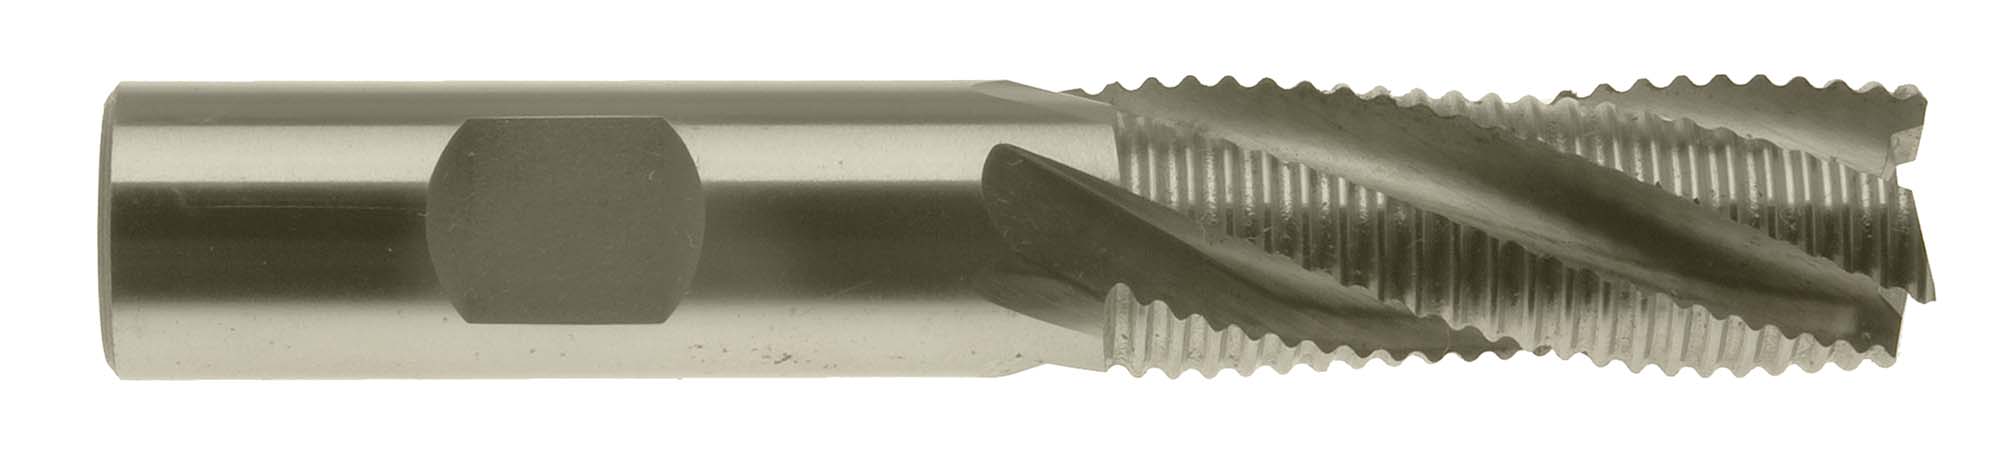 EM-CR328 - 5/8" Coarse Tooth M42 Cobalt Roughing End Mill- 5/8" Shank